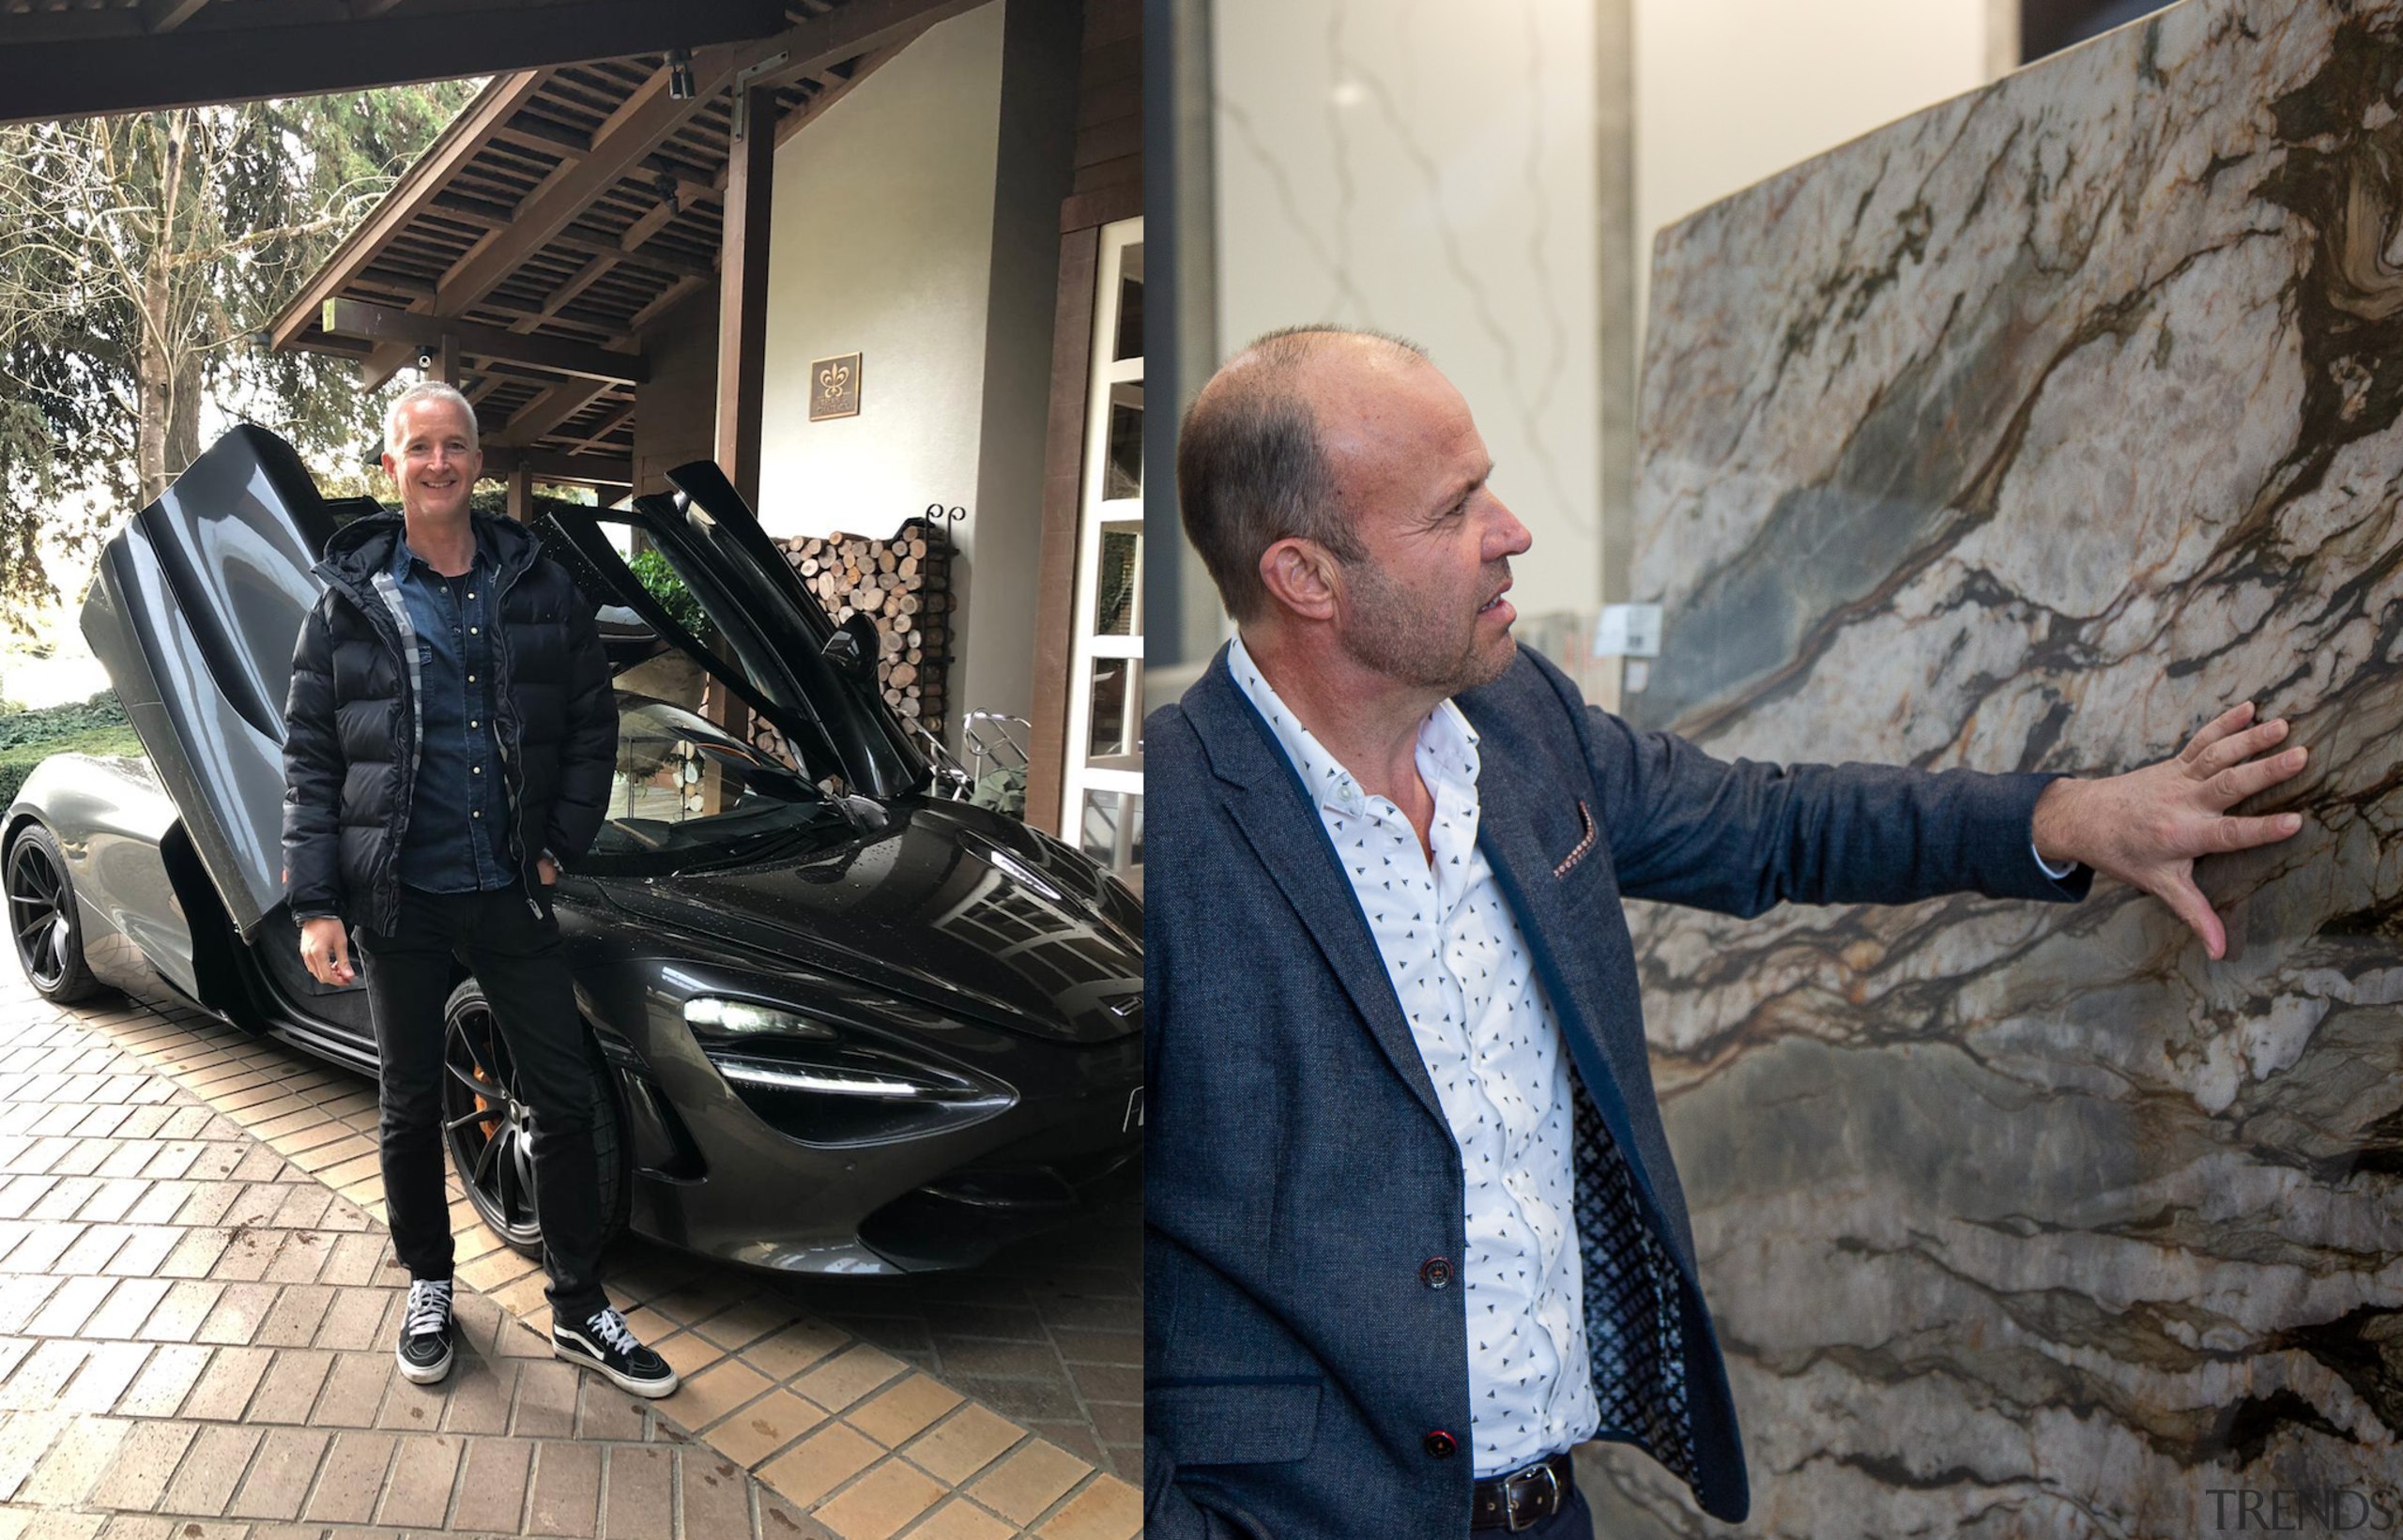 Morgan Cronin (left) and Shane George (right) – automotive design, car, compact car, executive car, luxury vehicle, personal luxury car, sports car, supercar, vehicle, vehicle door, black, gray